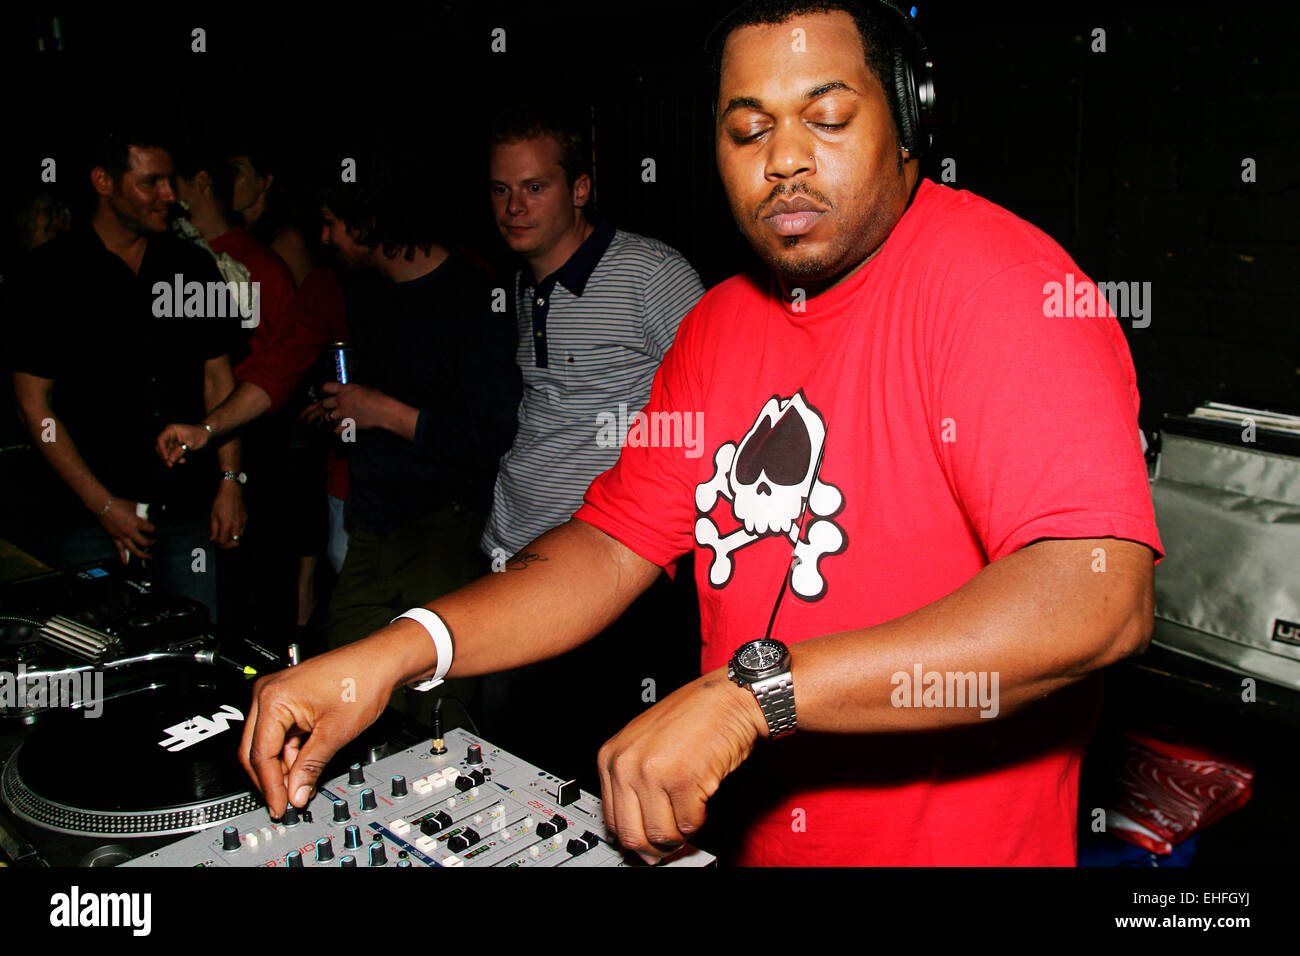 Derrick Carter DJing in The Key at the TDK Cross Central Festival London. Stock Photo